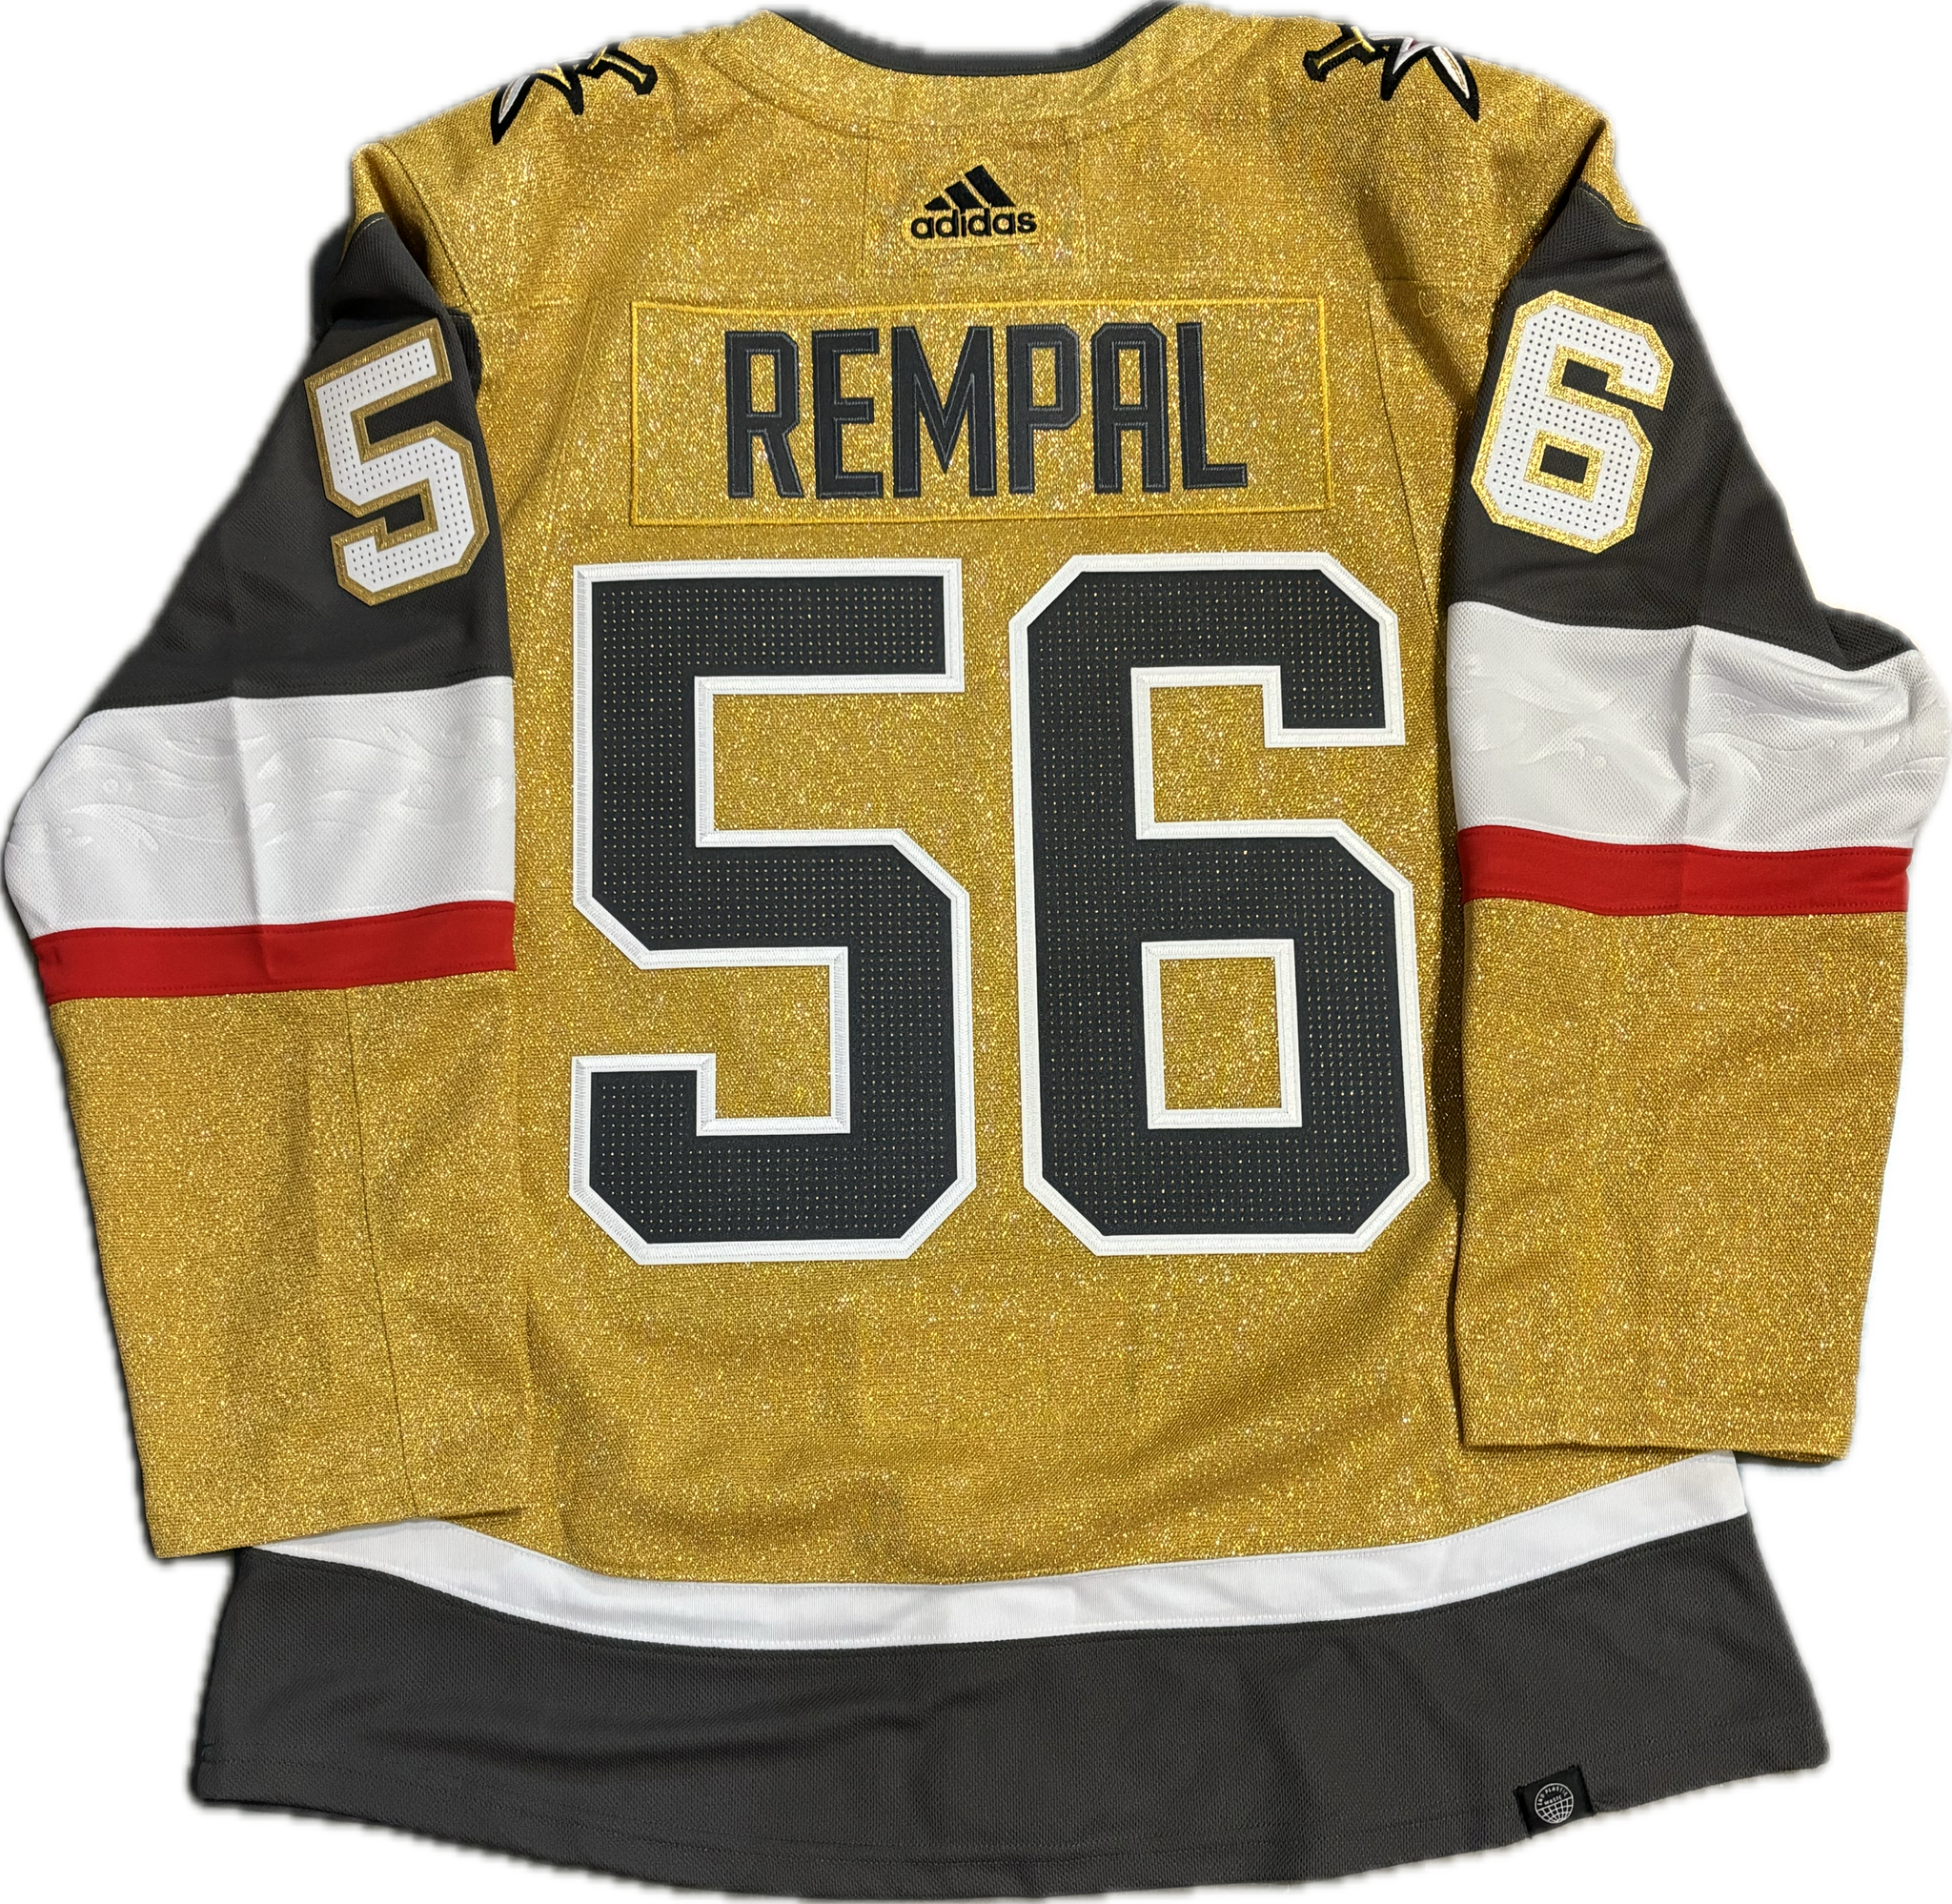 Vegas Golden Knights Rempal Authentic Adidas Jersey (Gold/White/Gray)